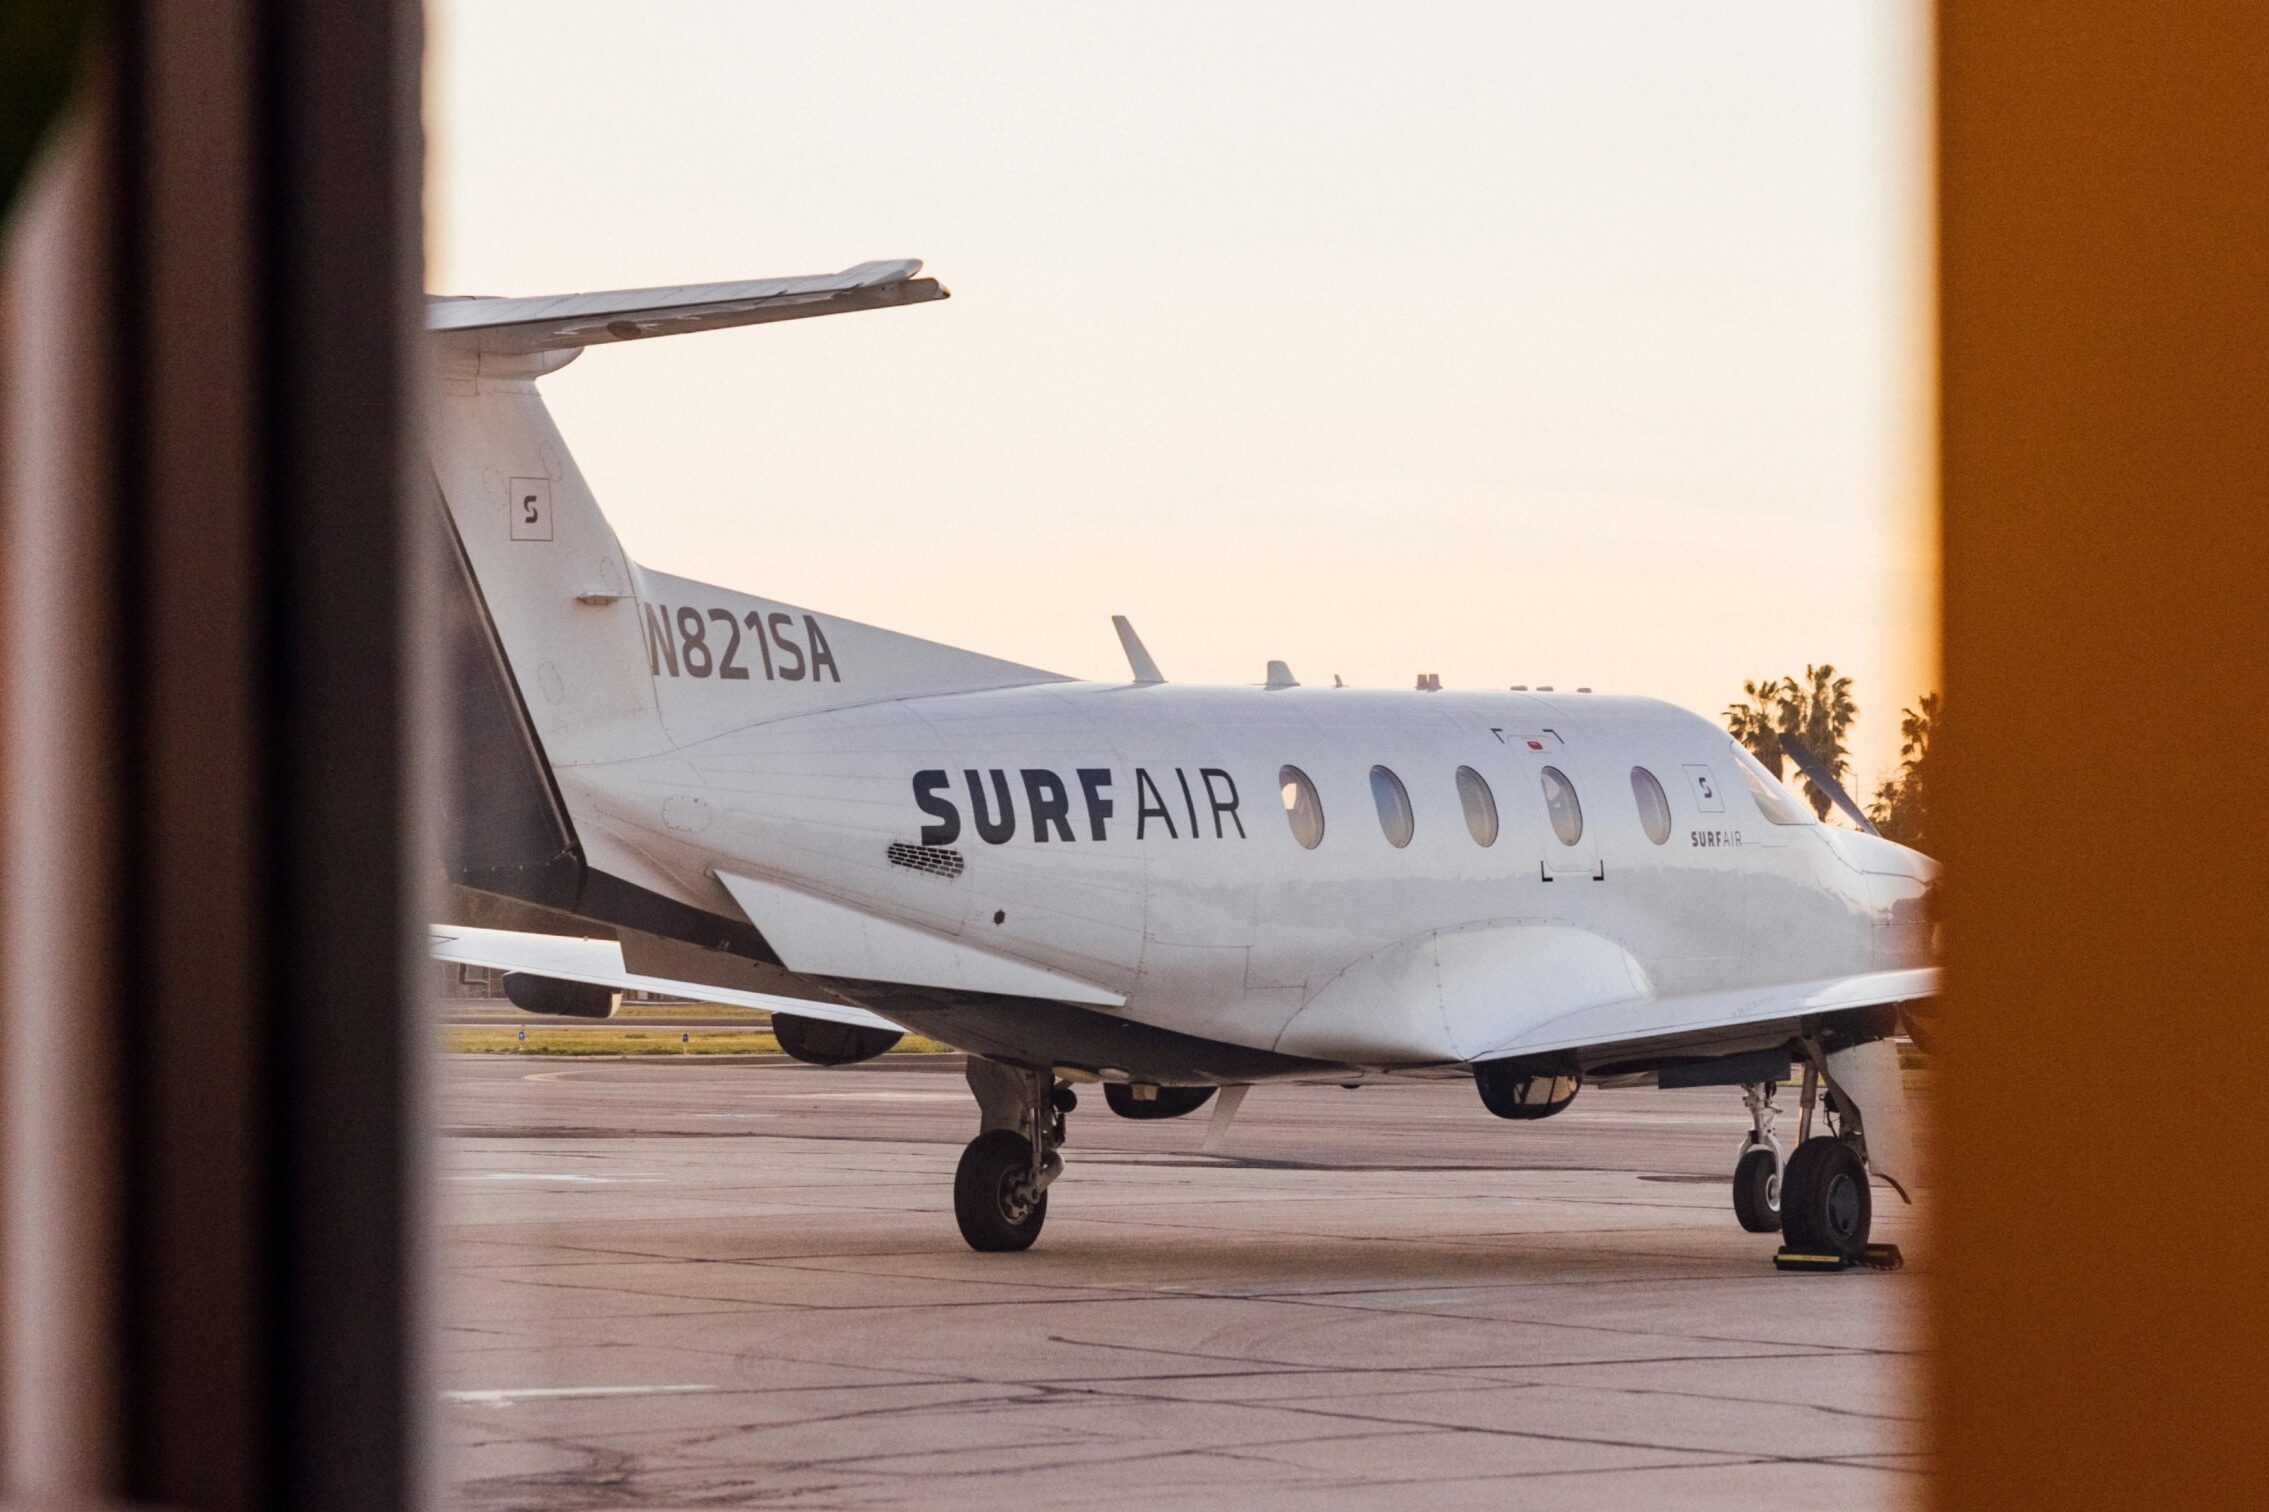 A SurfAir semi-private jet as seen through an opening in a door